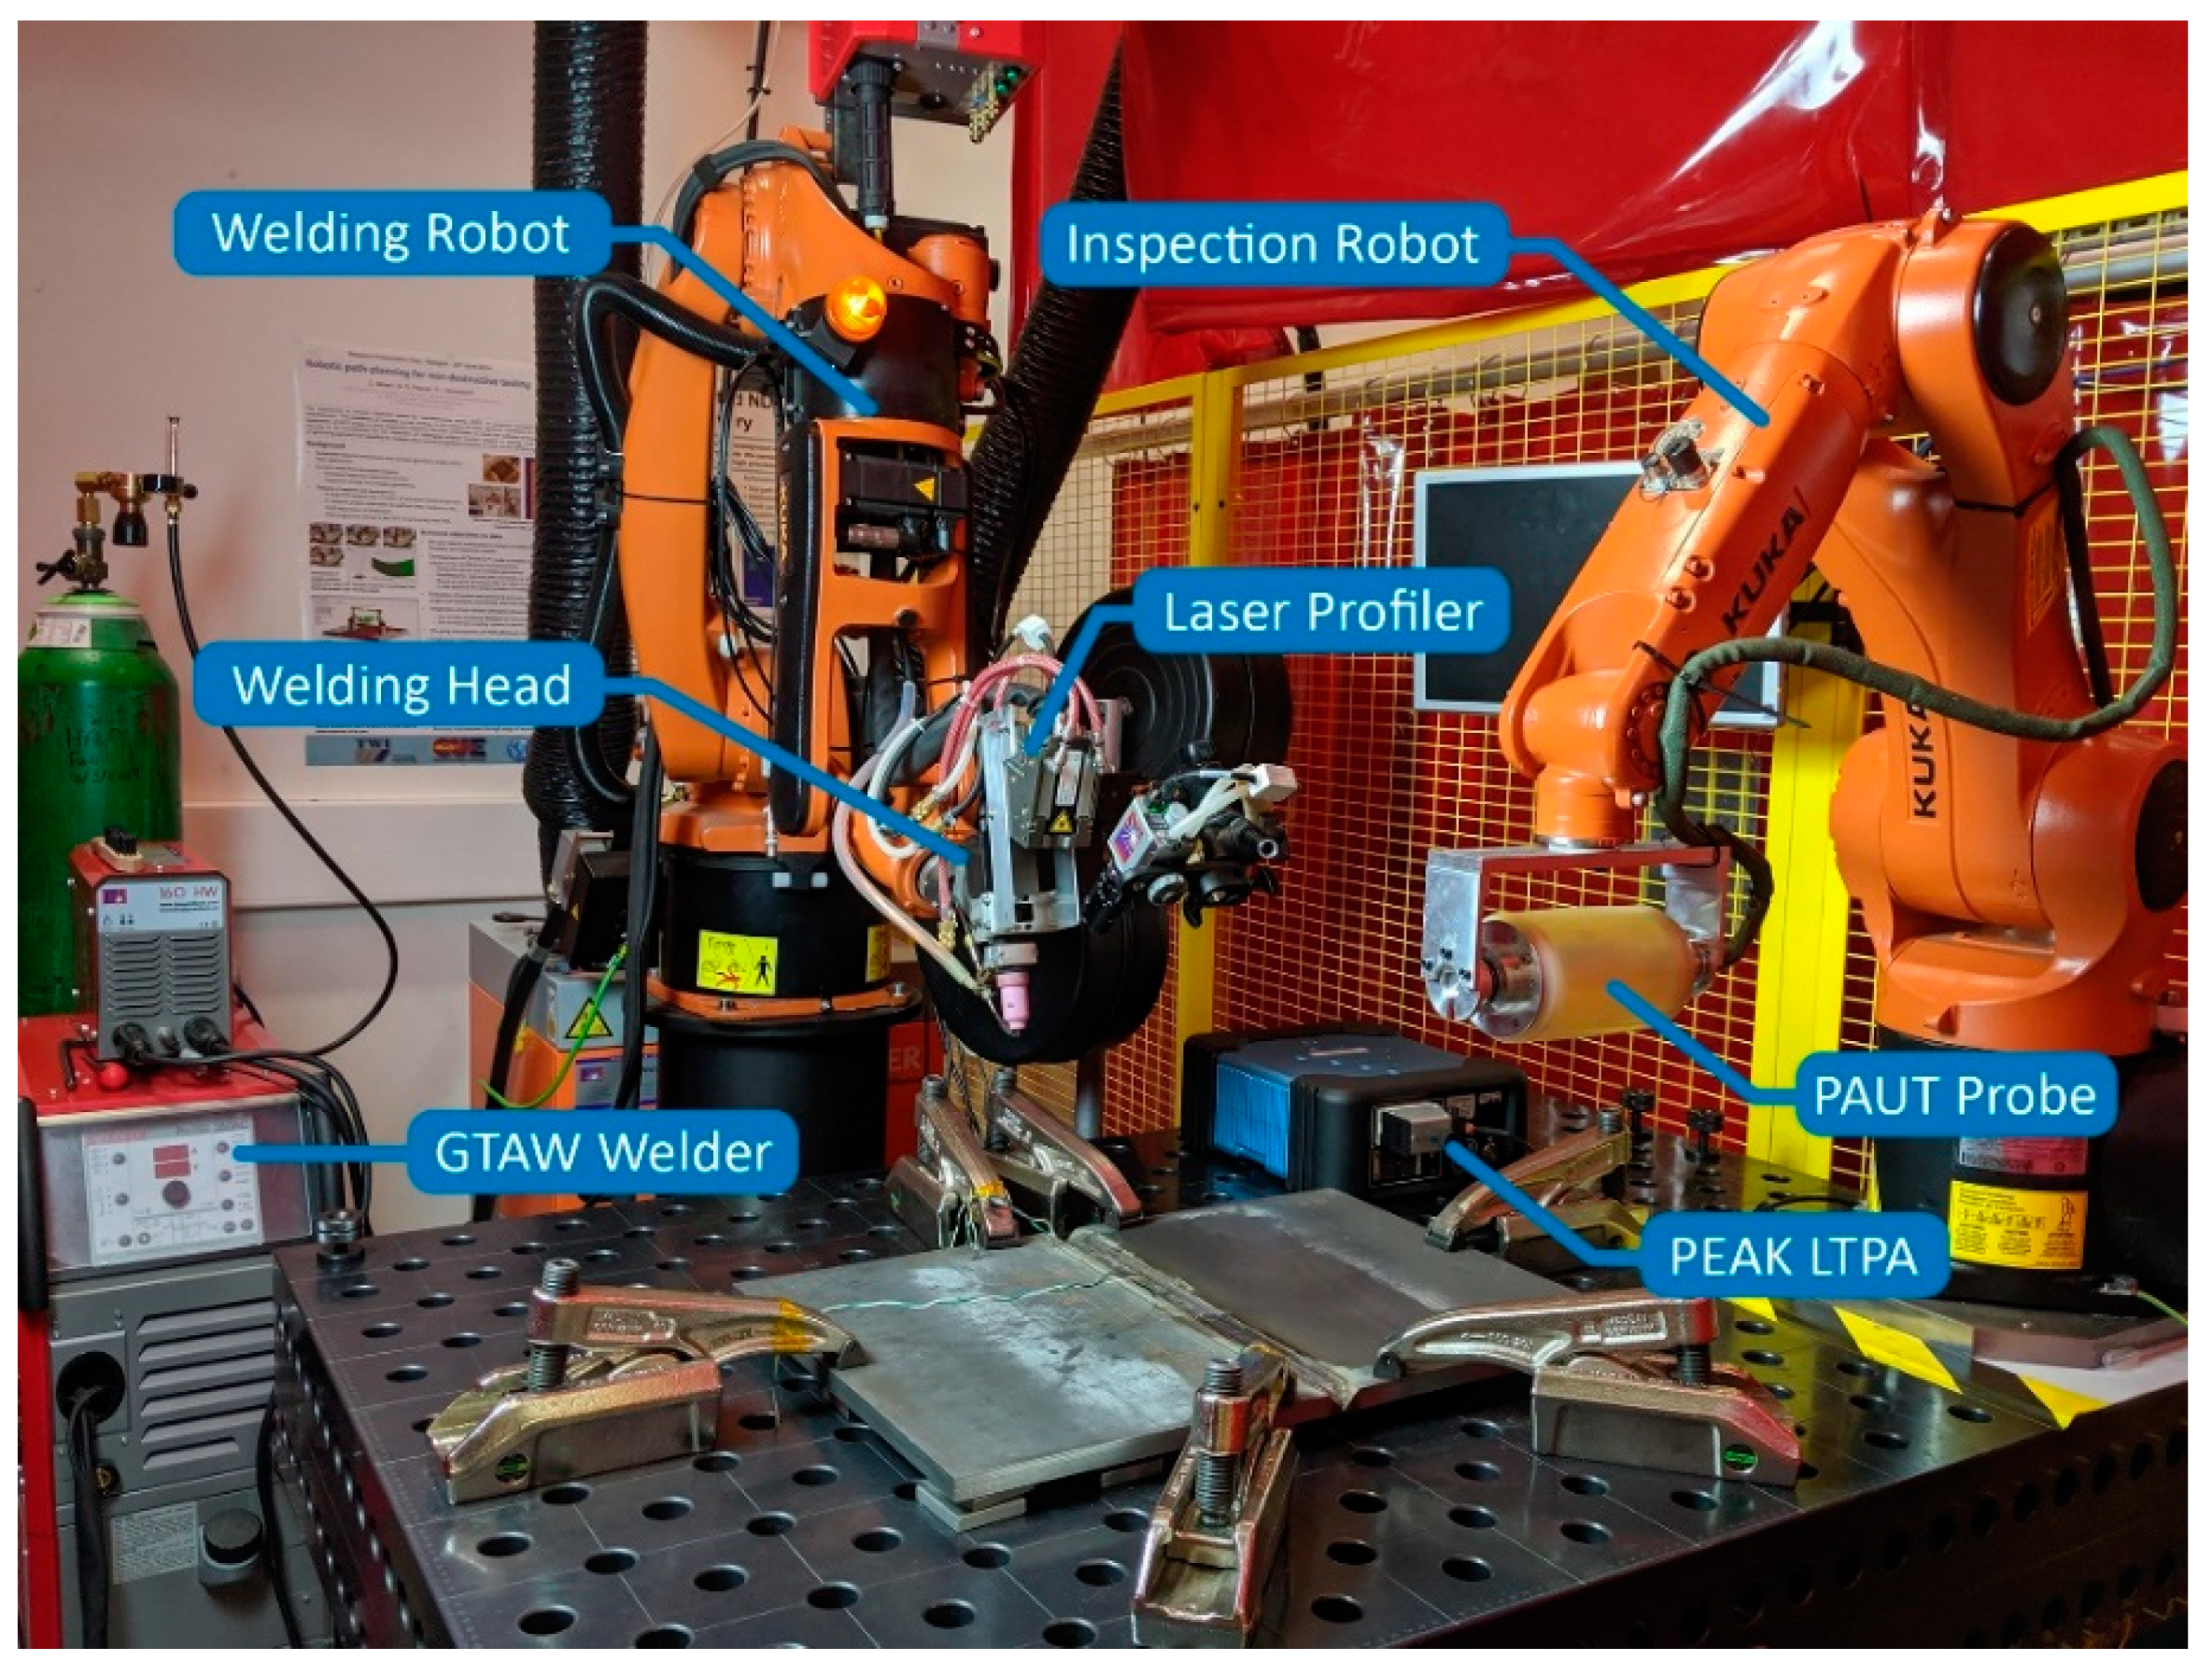 Sensors | Free Full-Text | Sensor-Enabled Multi-Robot System for Automated  Welding and In-Process Ultrasonic NDE